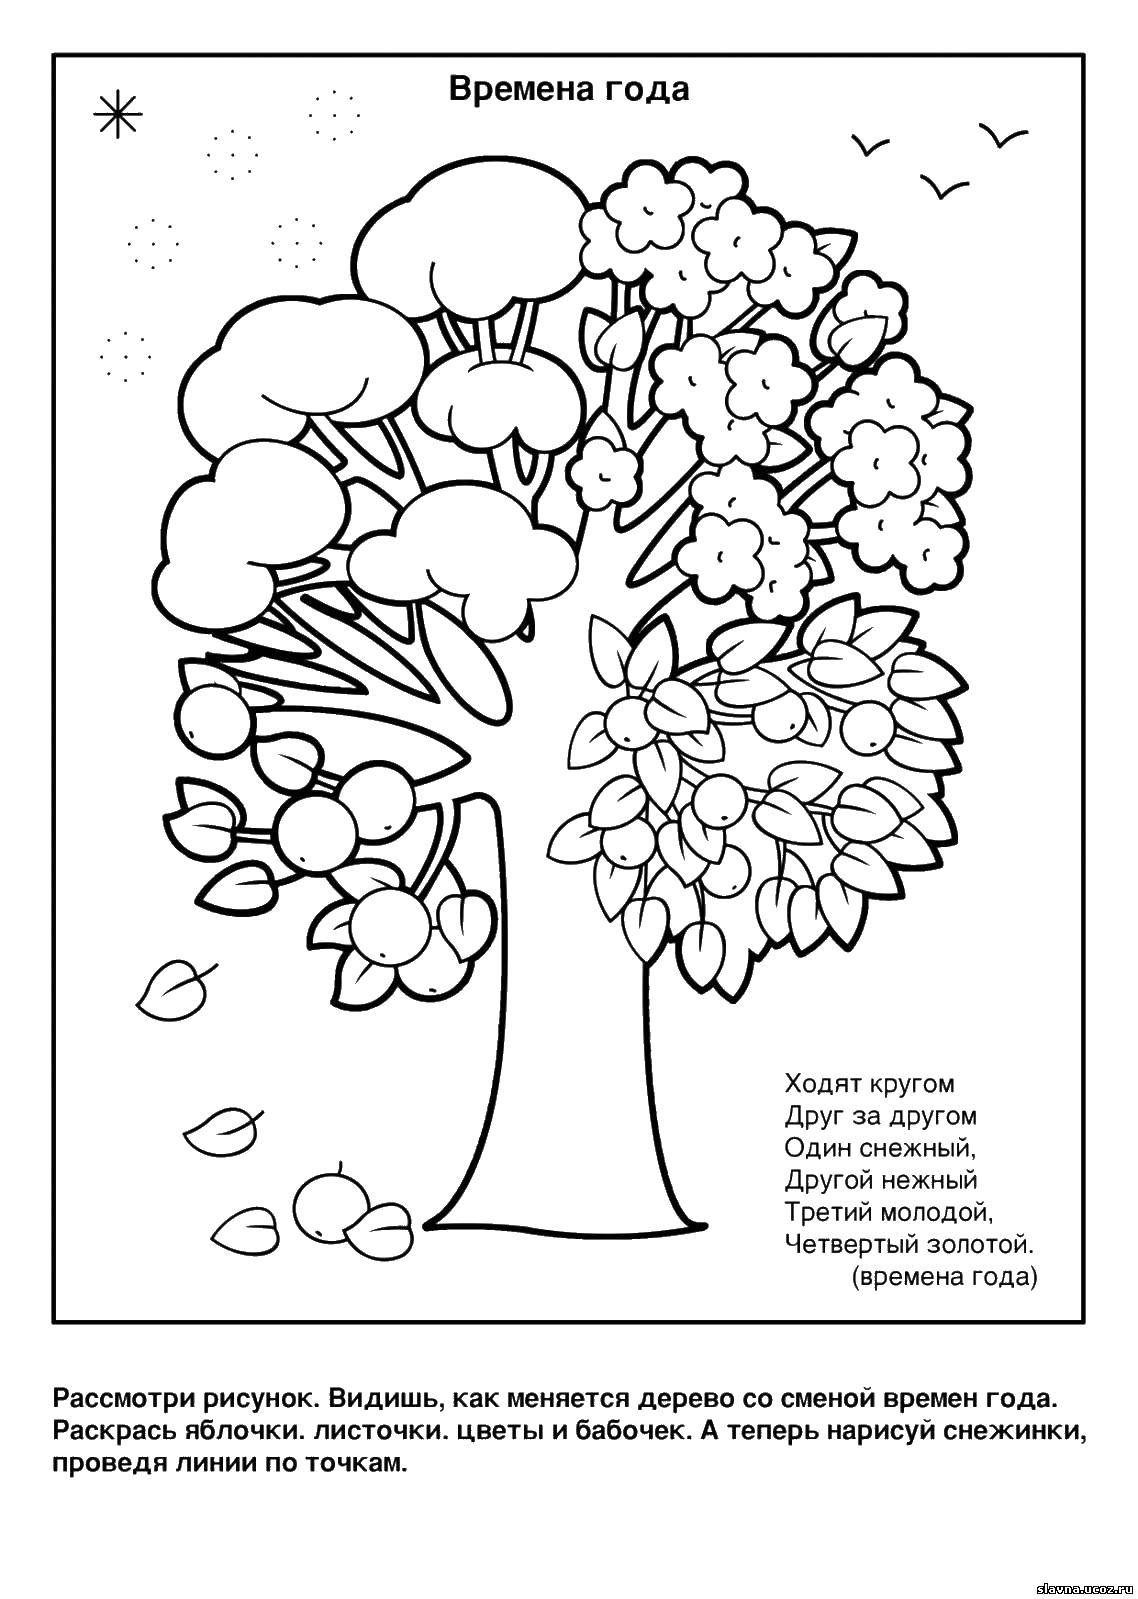 Coloring Seasons. Category puzzles , coloring pages. Tags:  seasons, riddles, coloring, thinking.